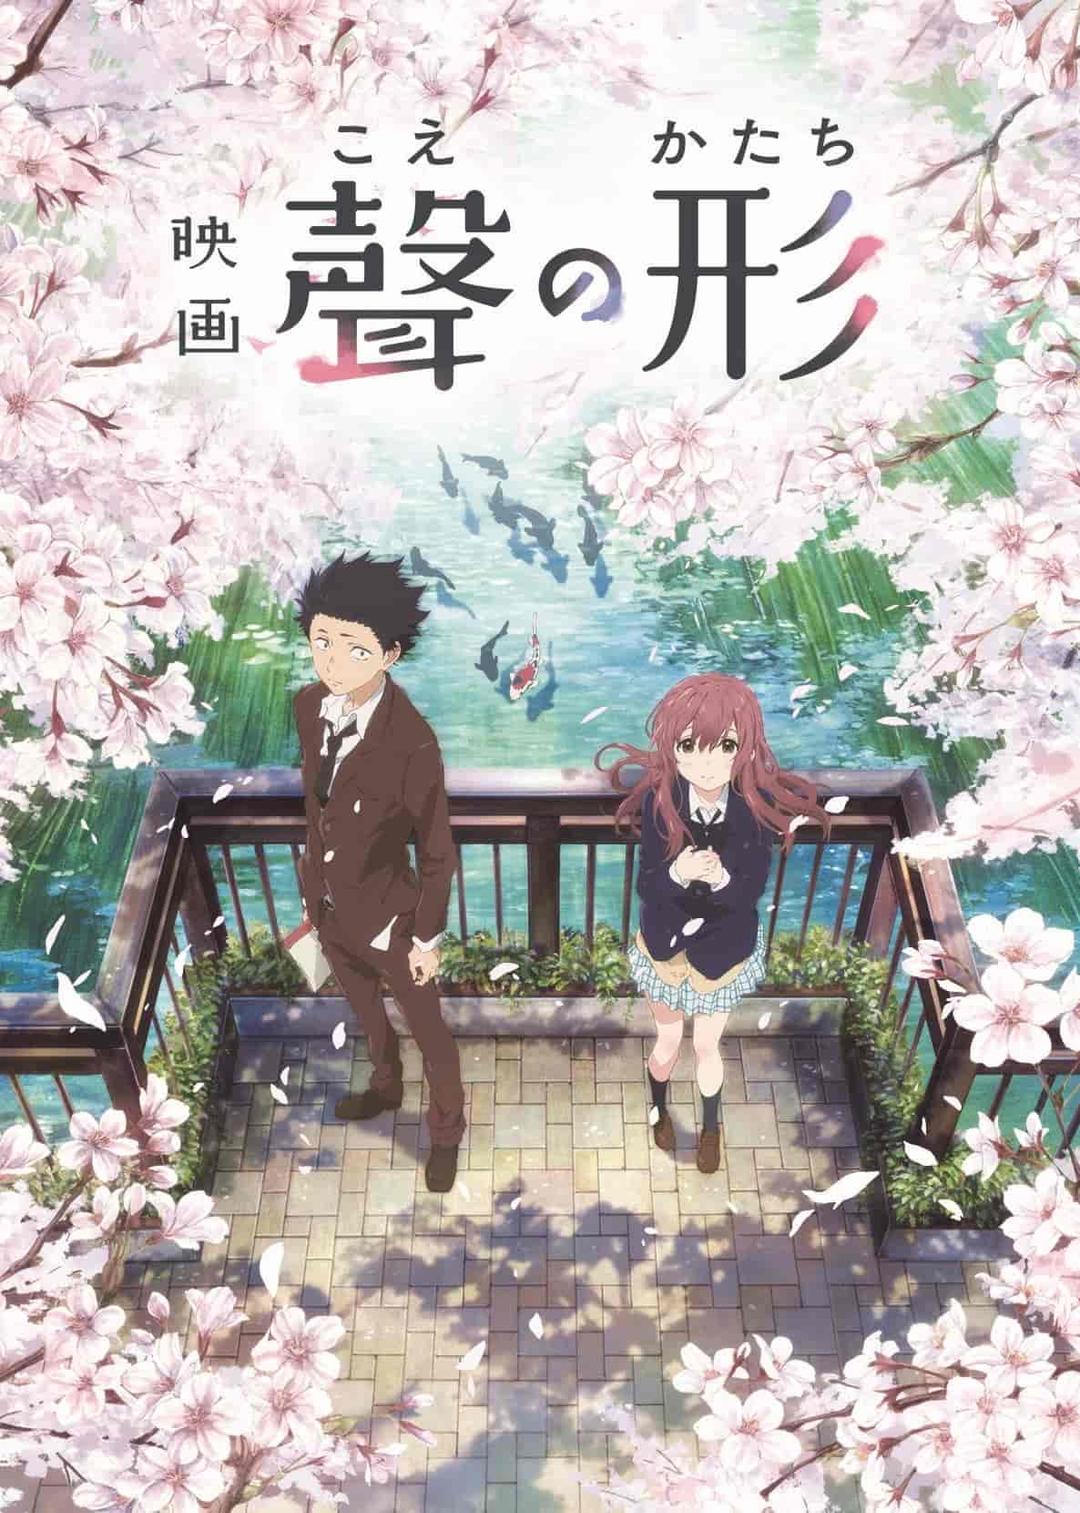 A Silent Voice poster